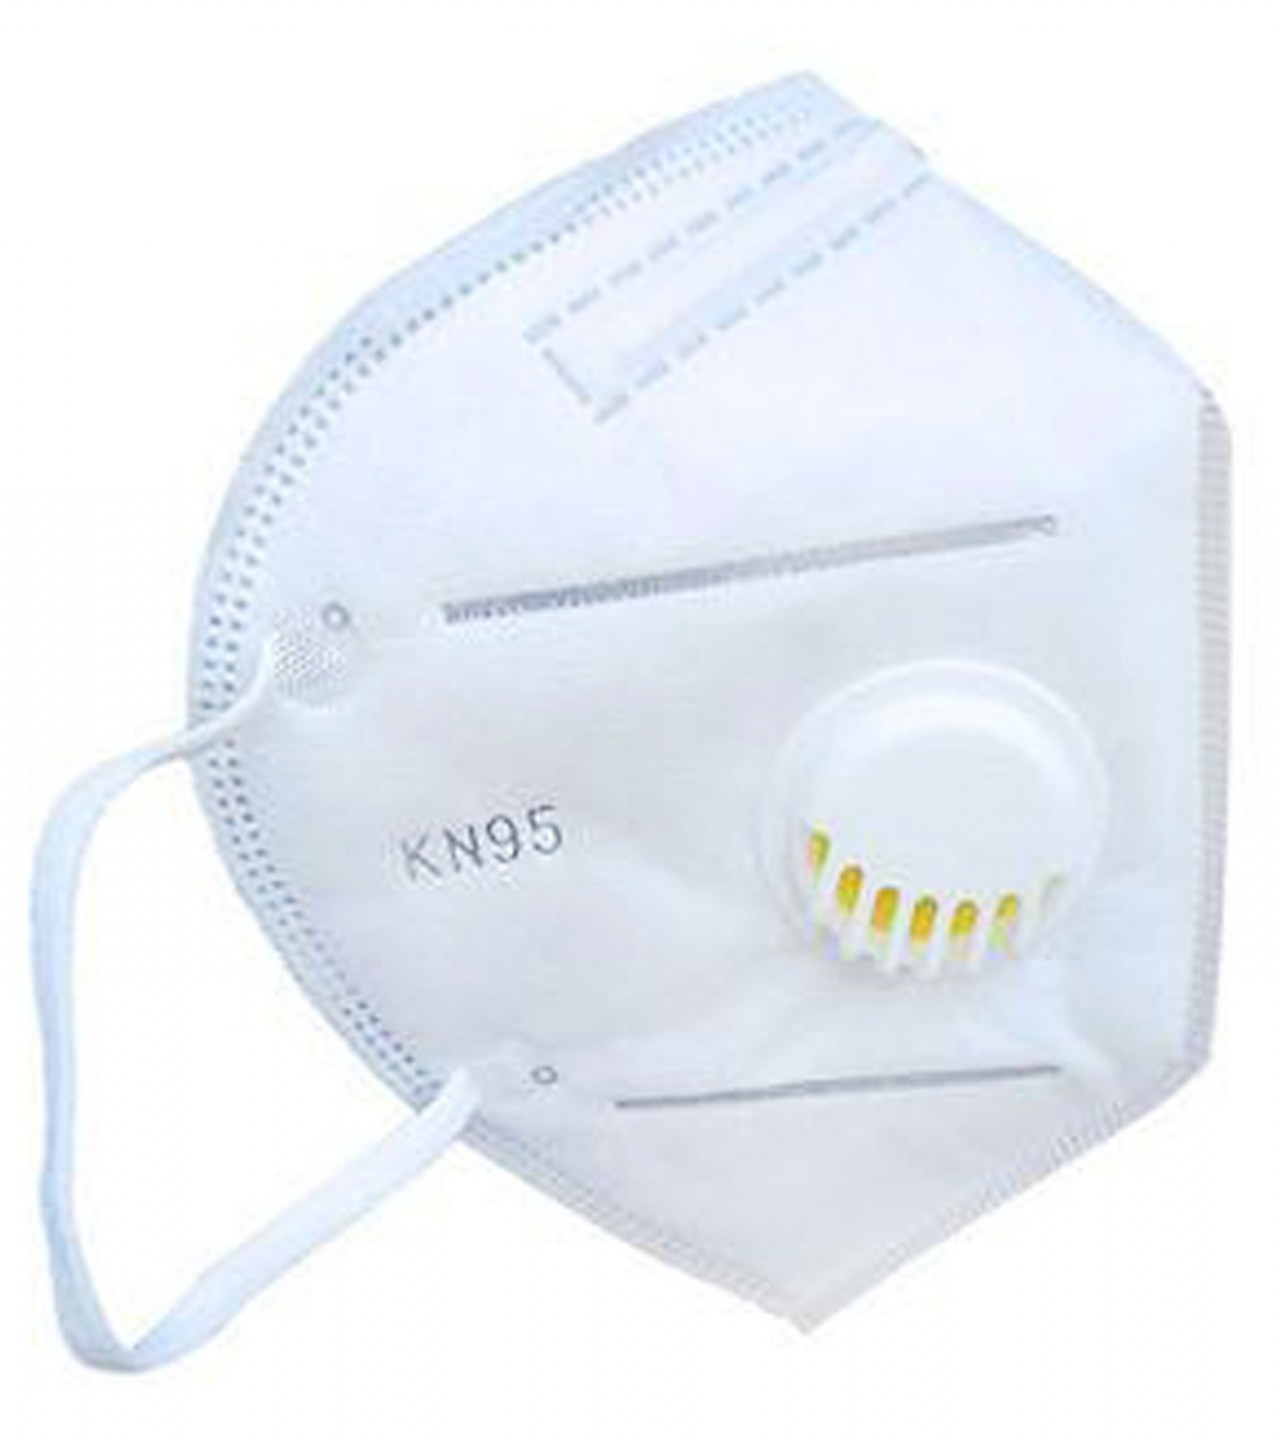 KN95 Self Priming Filter Protection Mask - White